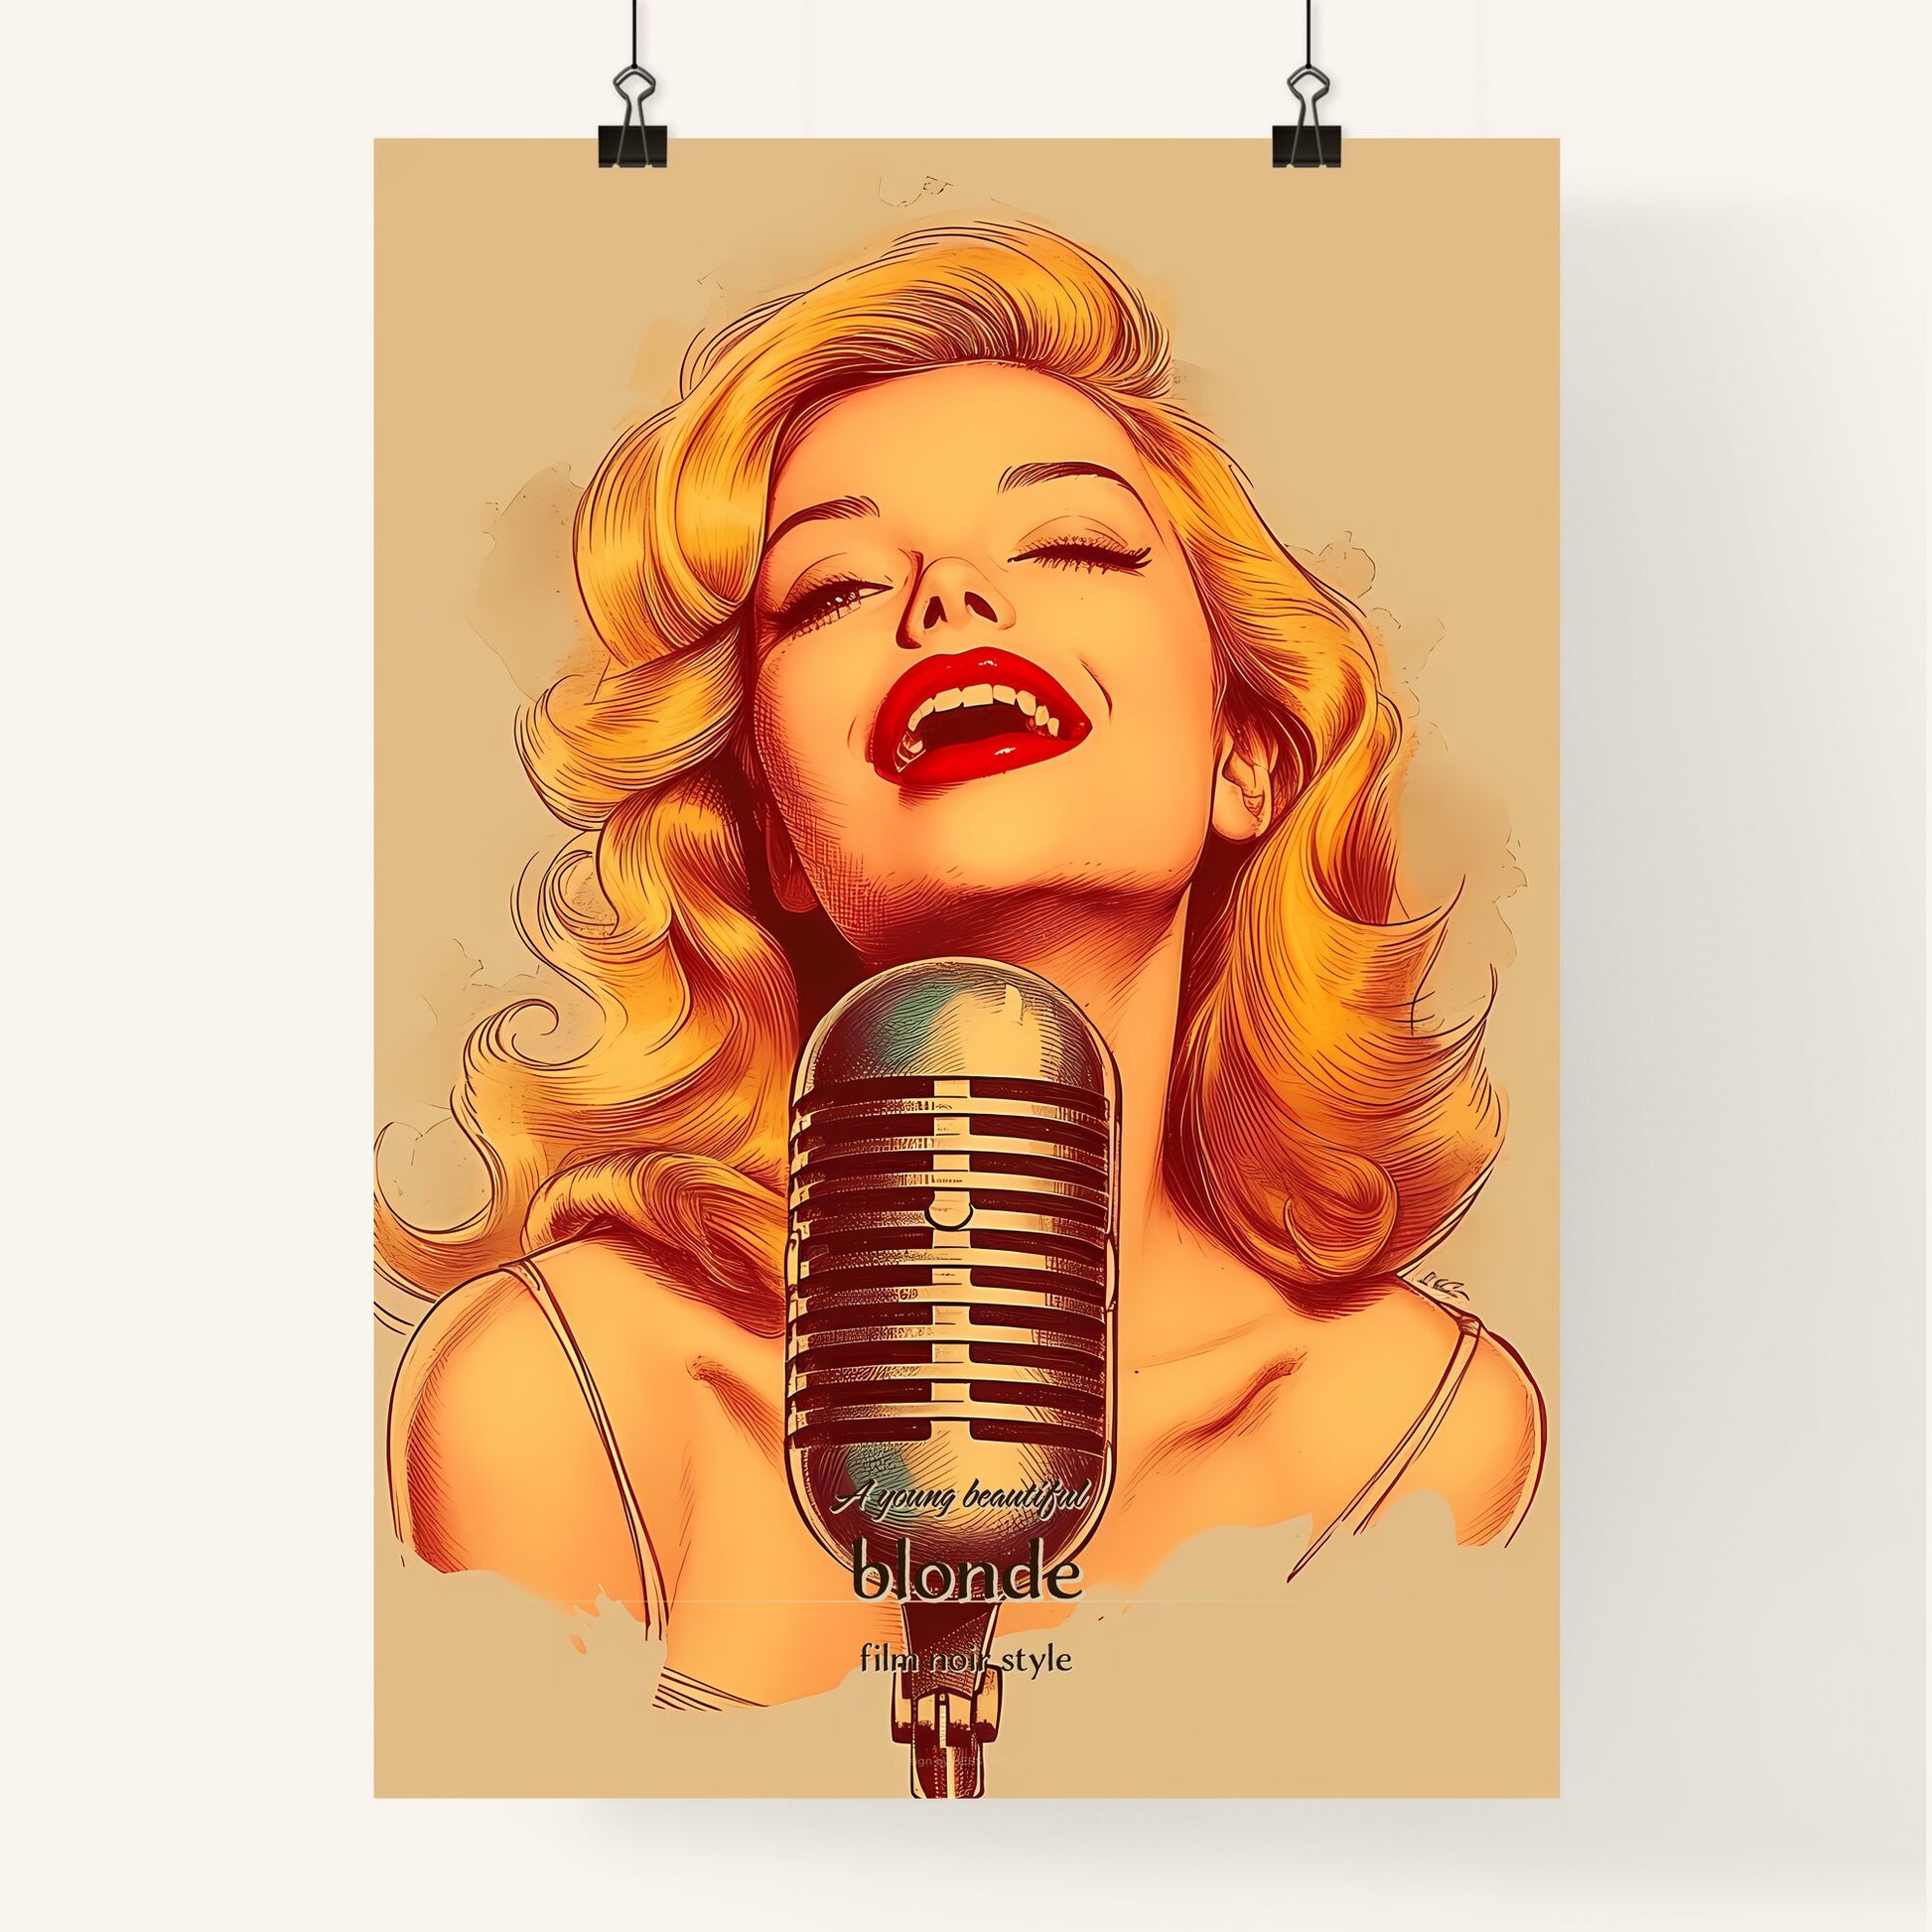 A young beautiful, blonde, film noir style, A Poster of a woman singing into a microphone Default Title